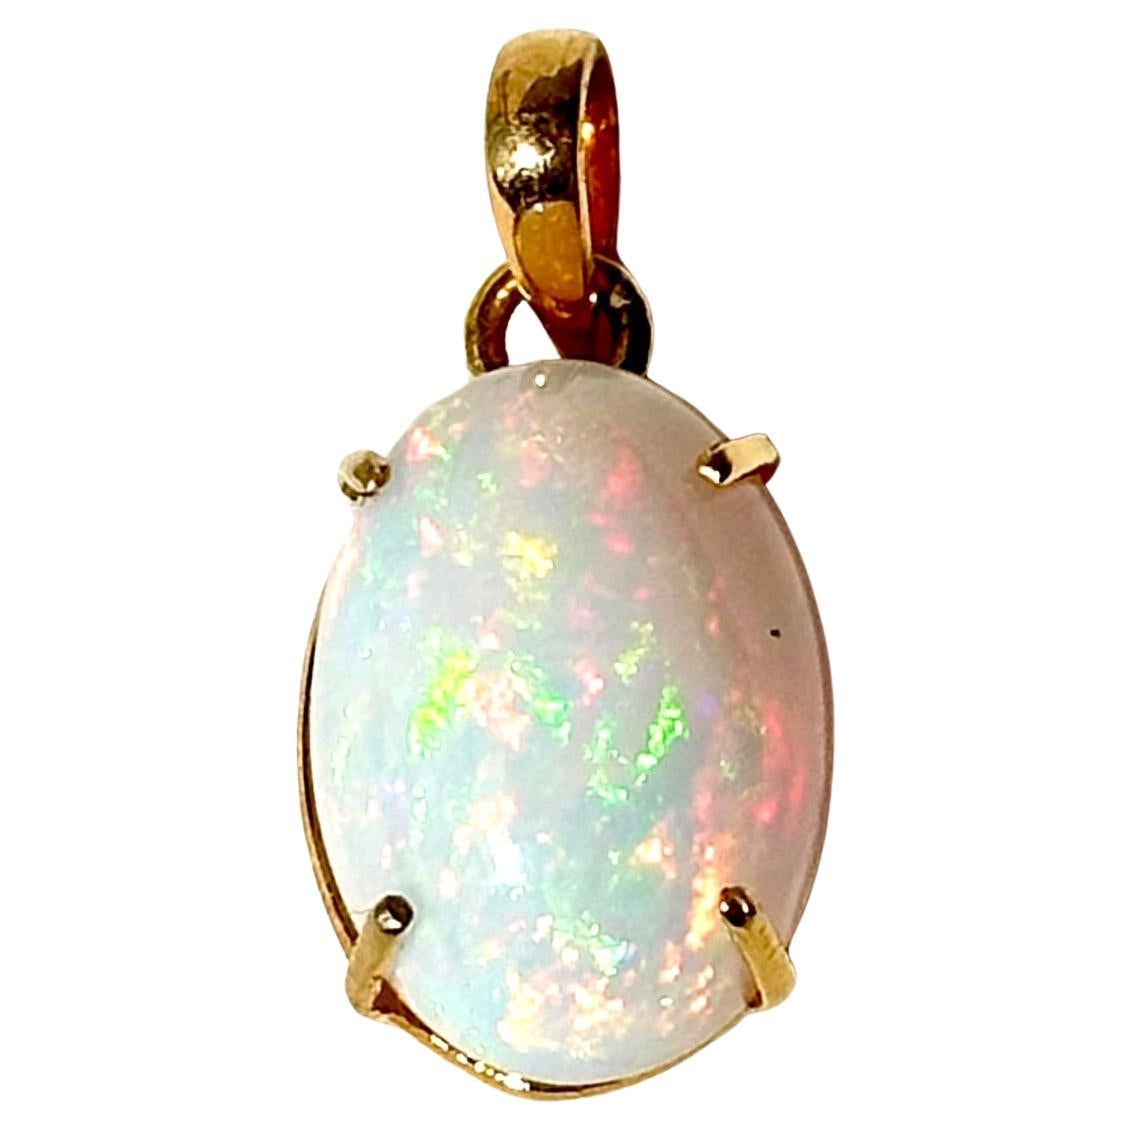 12.62ct Ethiopian opal stone in 14k yellow gold for pendant For Sale